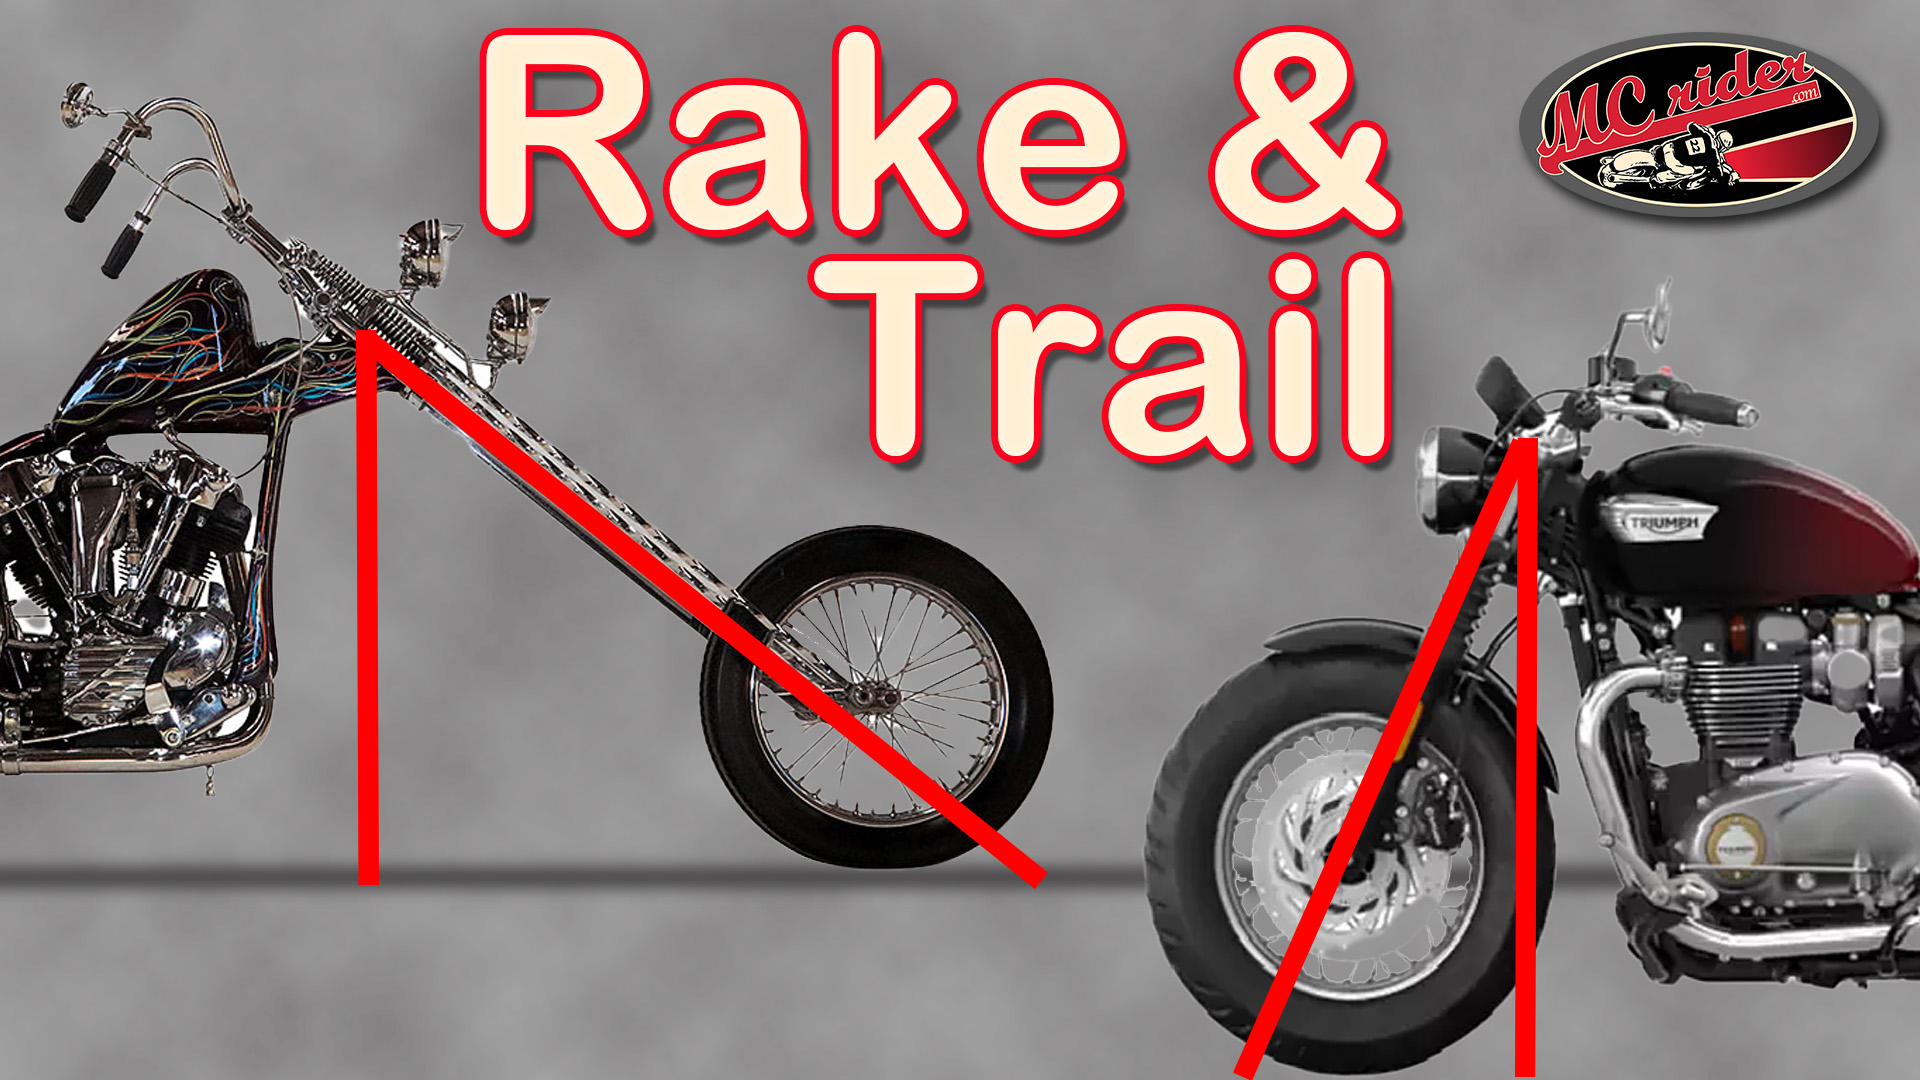 Motorcycle Rake & Trail - How it affects motorcycle handling - MCrider